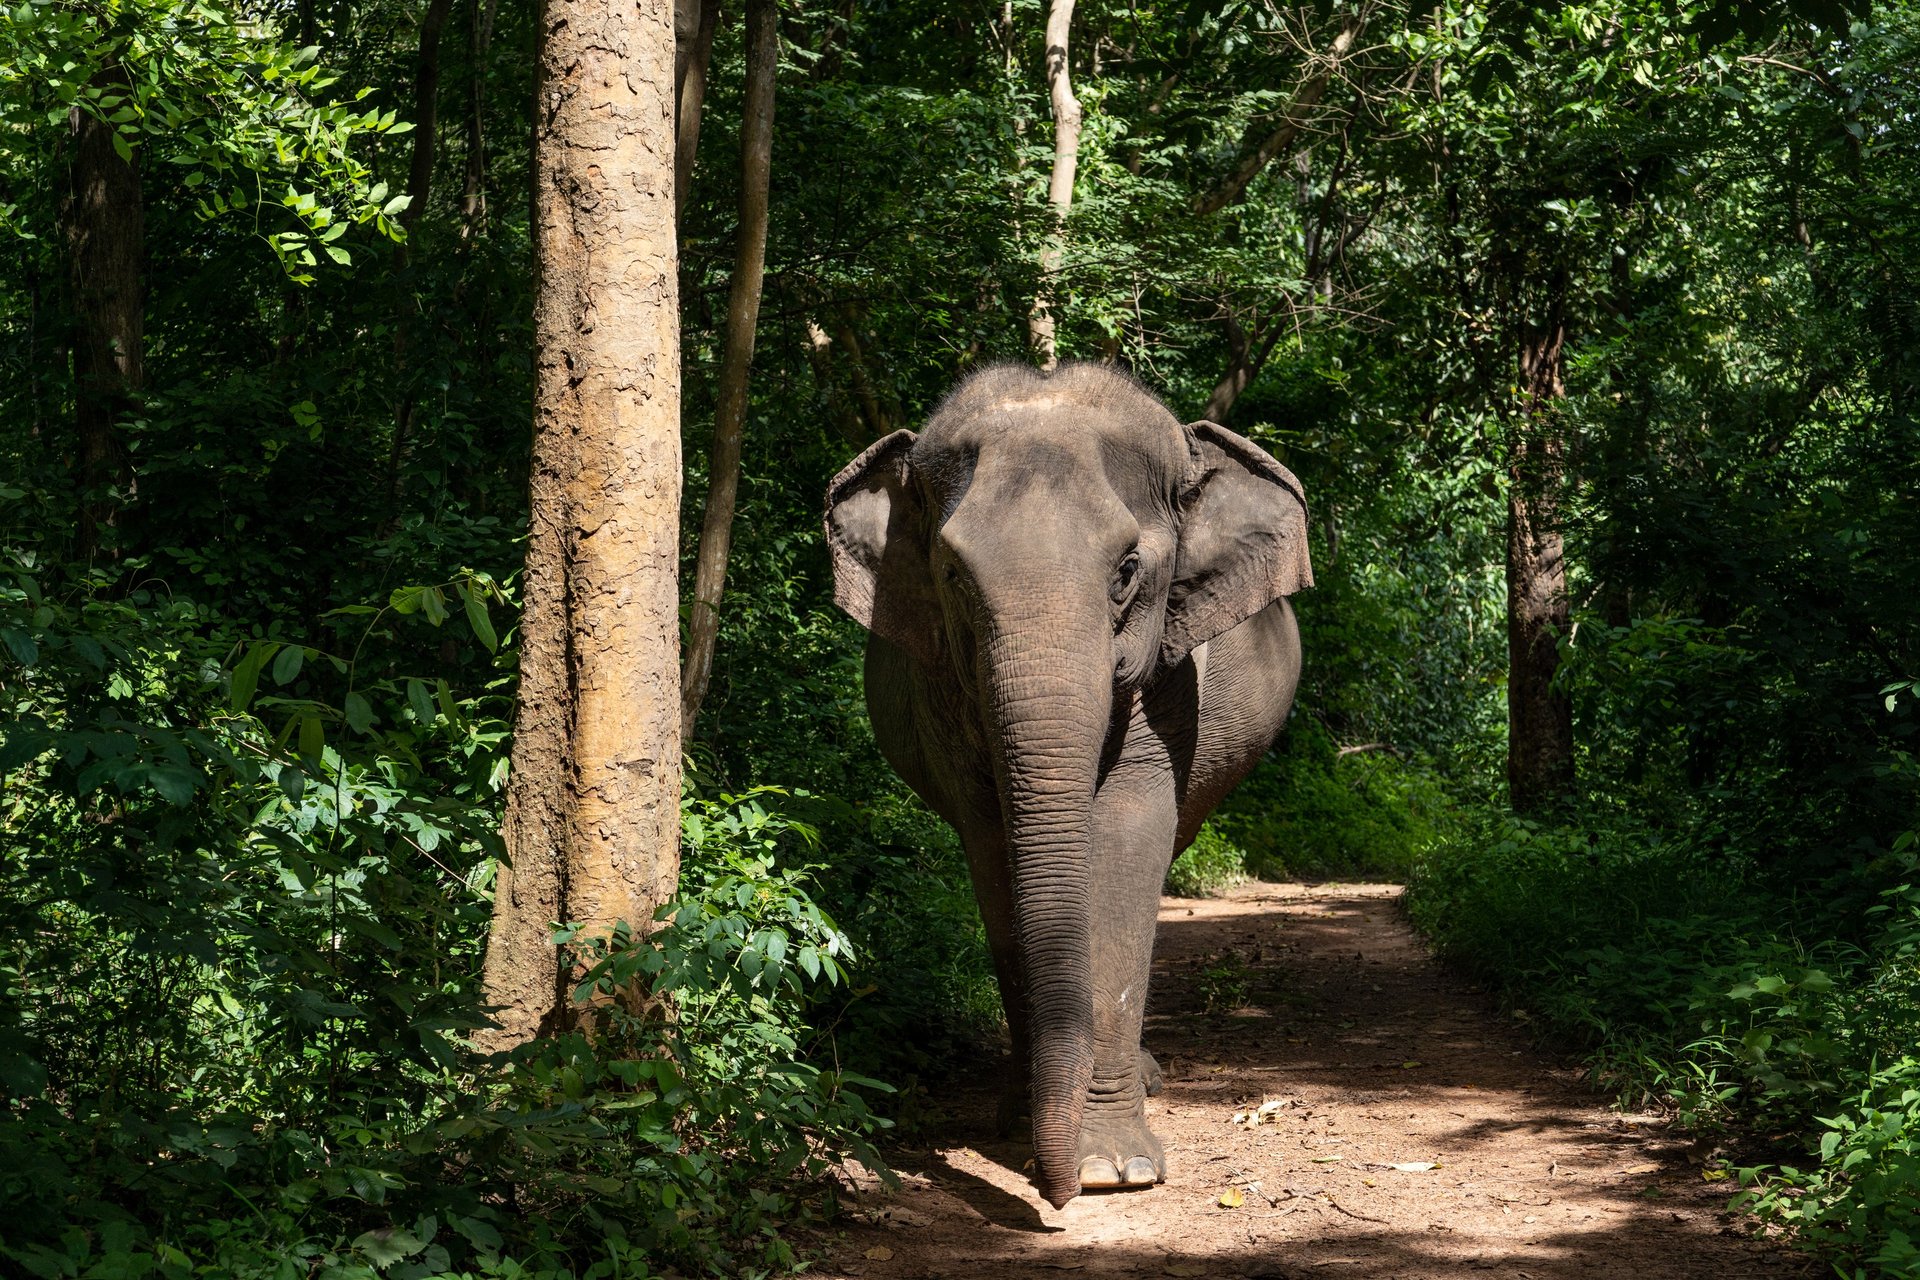 The elephant Boon Lai goes for a walk. The elephant is surrounded by tropical greenery including trees and grass.